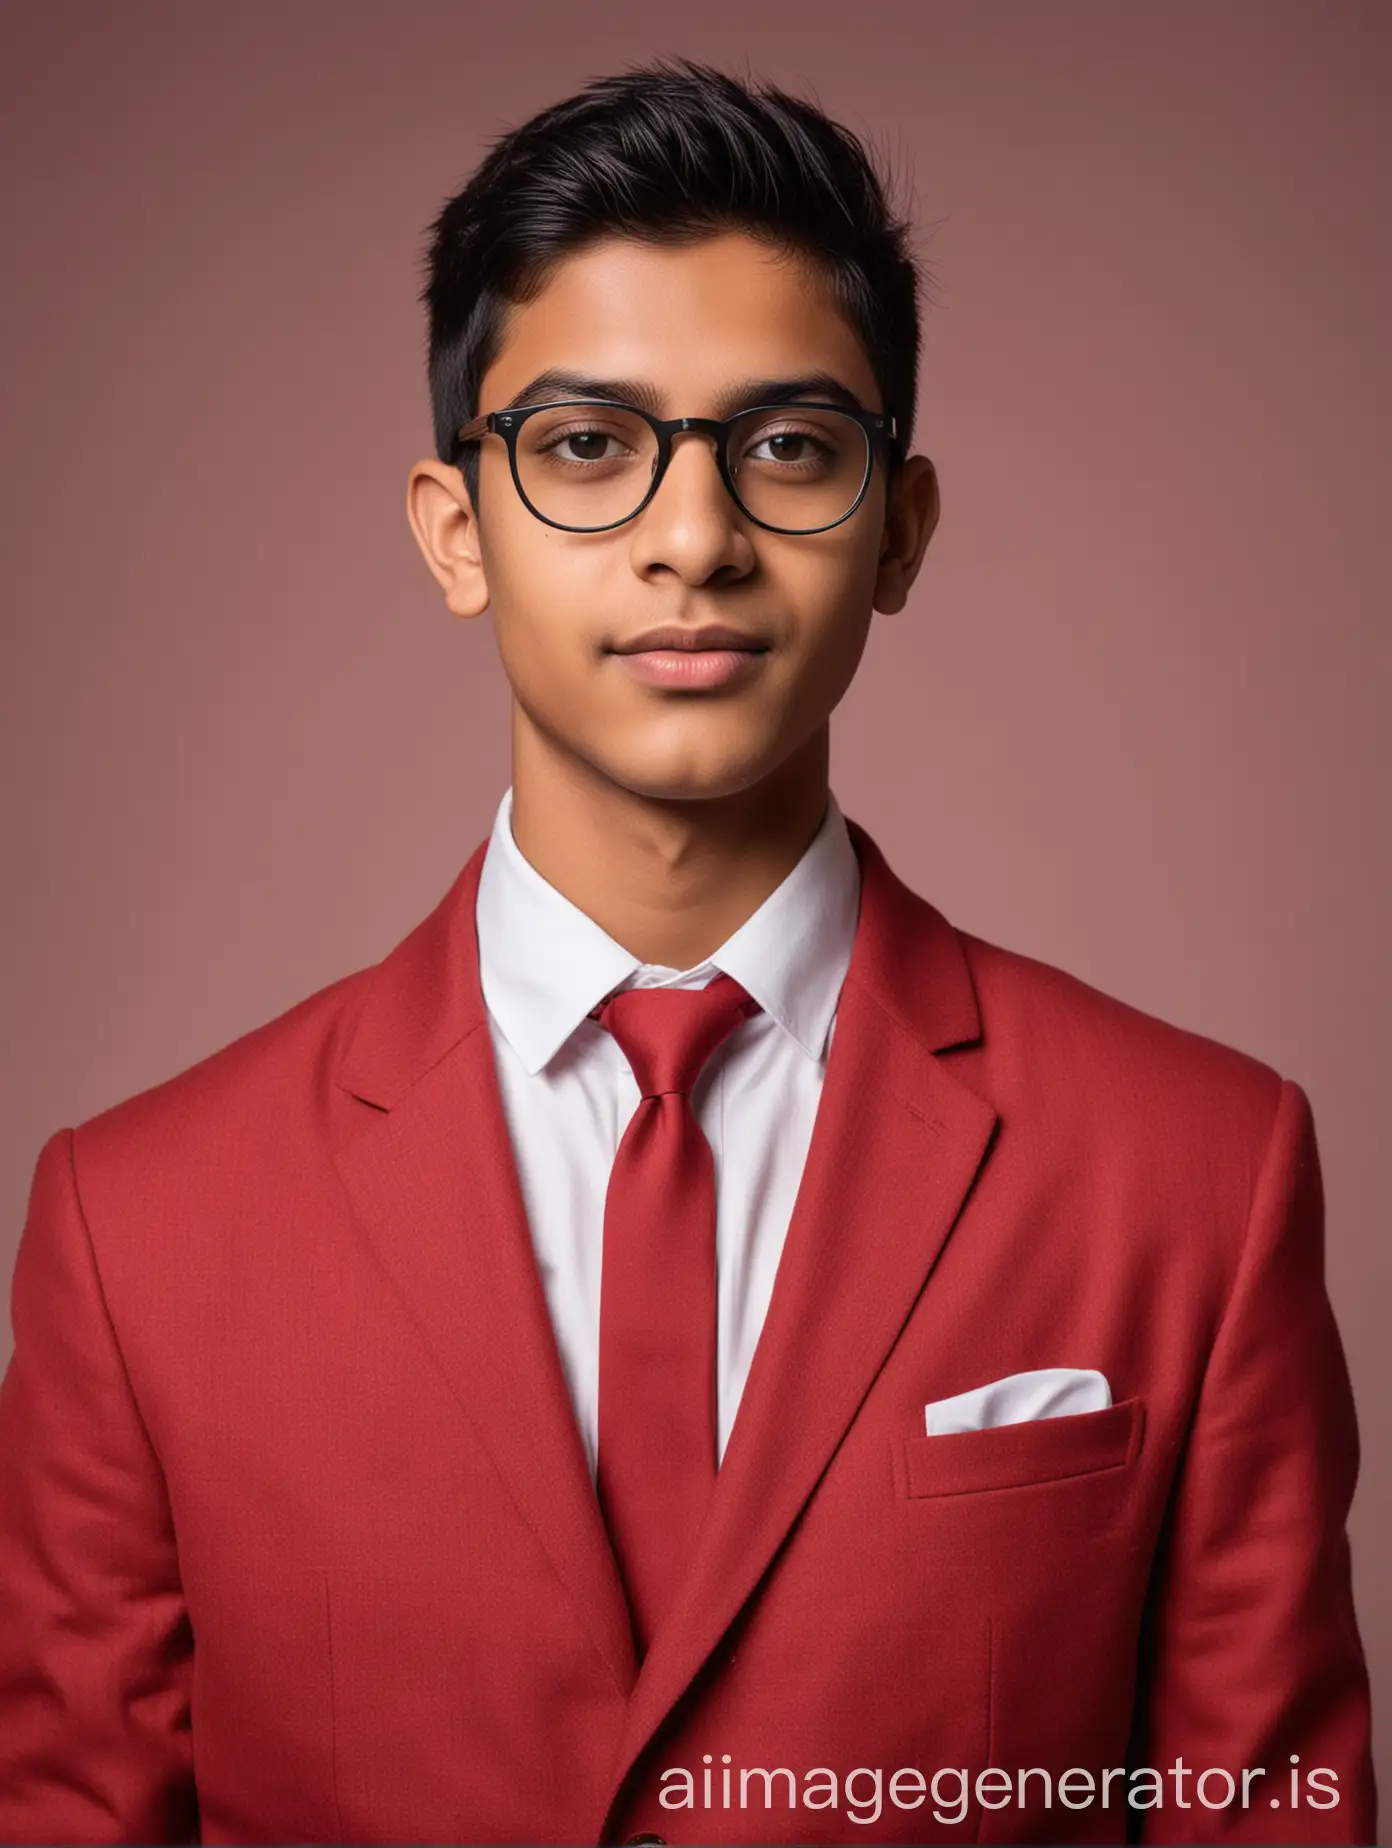 18 year old indian boy With fair skin Wearing spectacles and narrow body Posing for a linkedin picture in formalsformed red blazer light in background